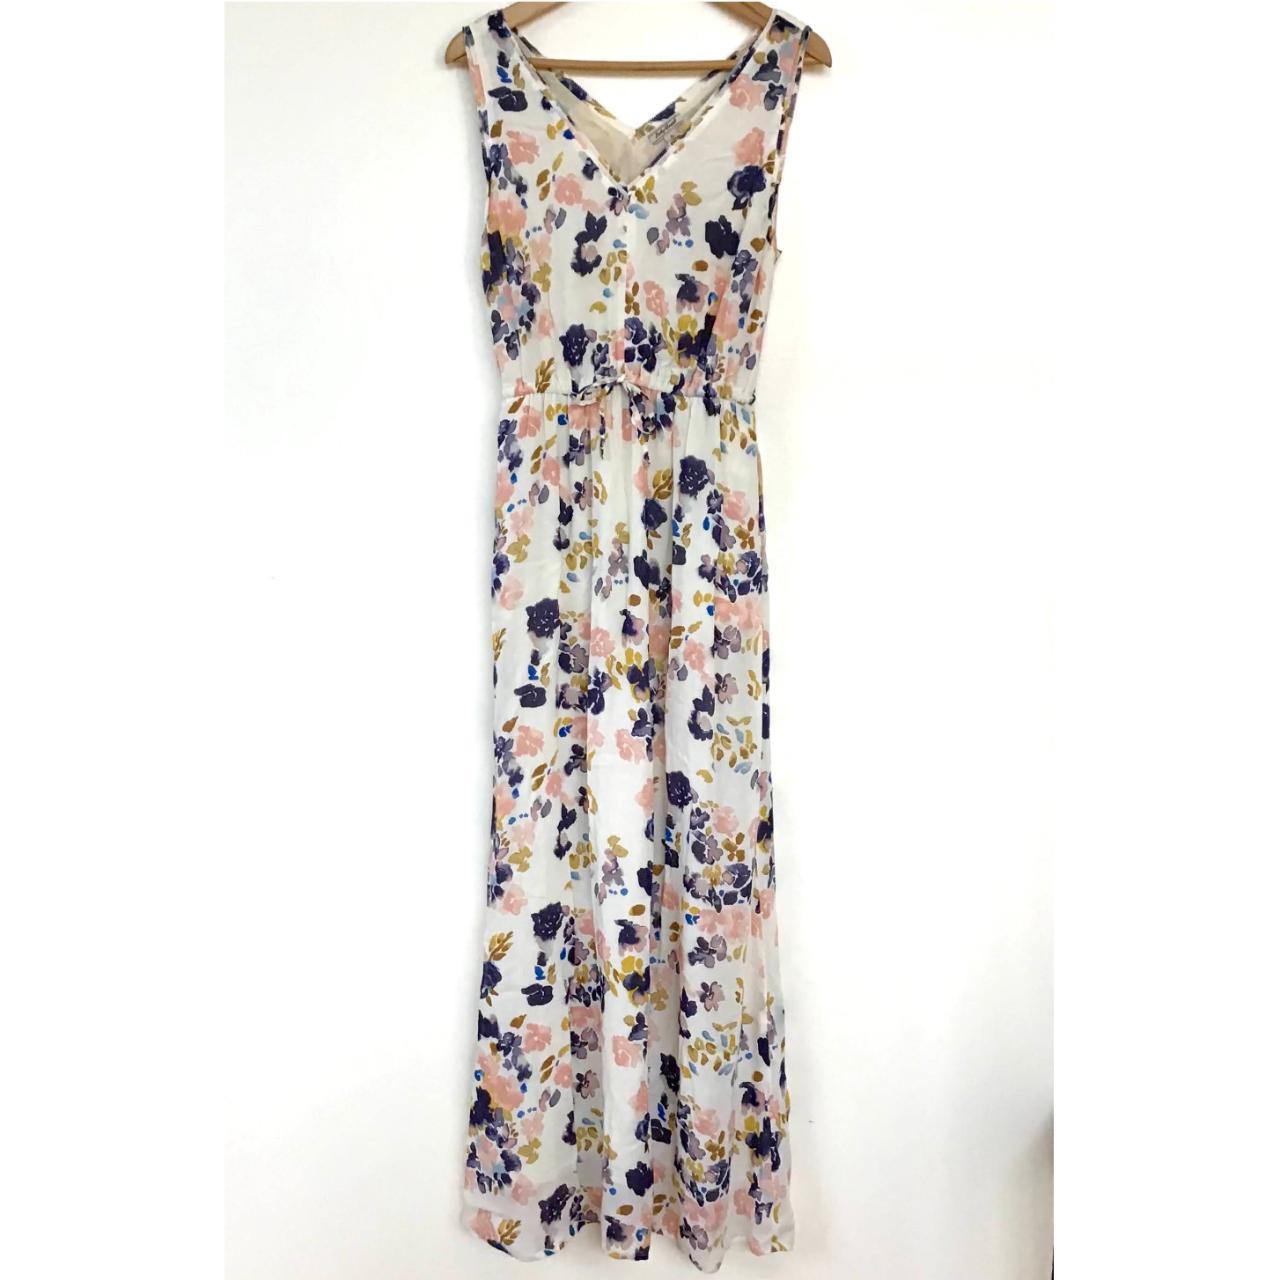 Product Image 2 - Lucky Brand Floral Maxi Dress

double